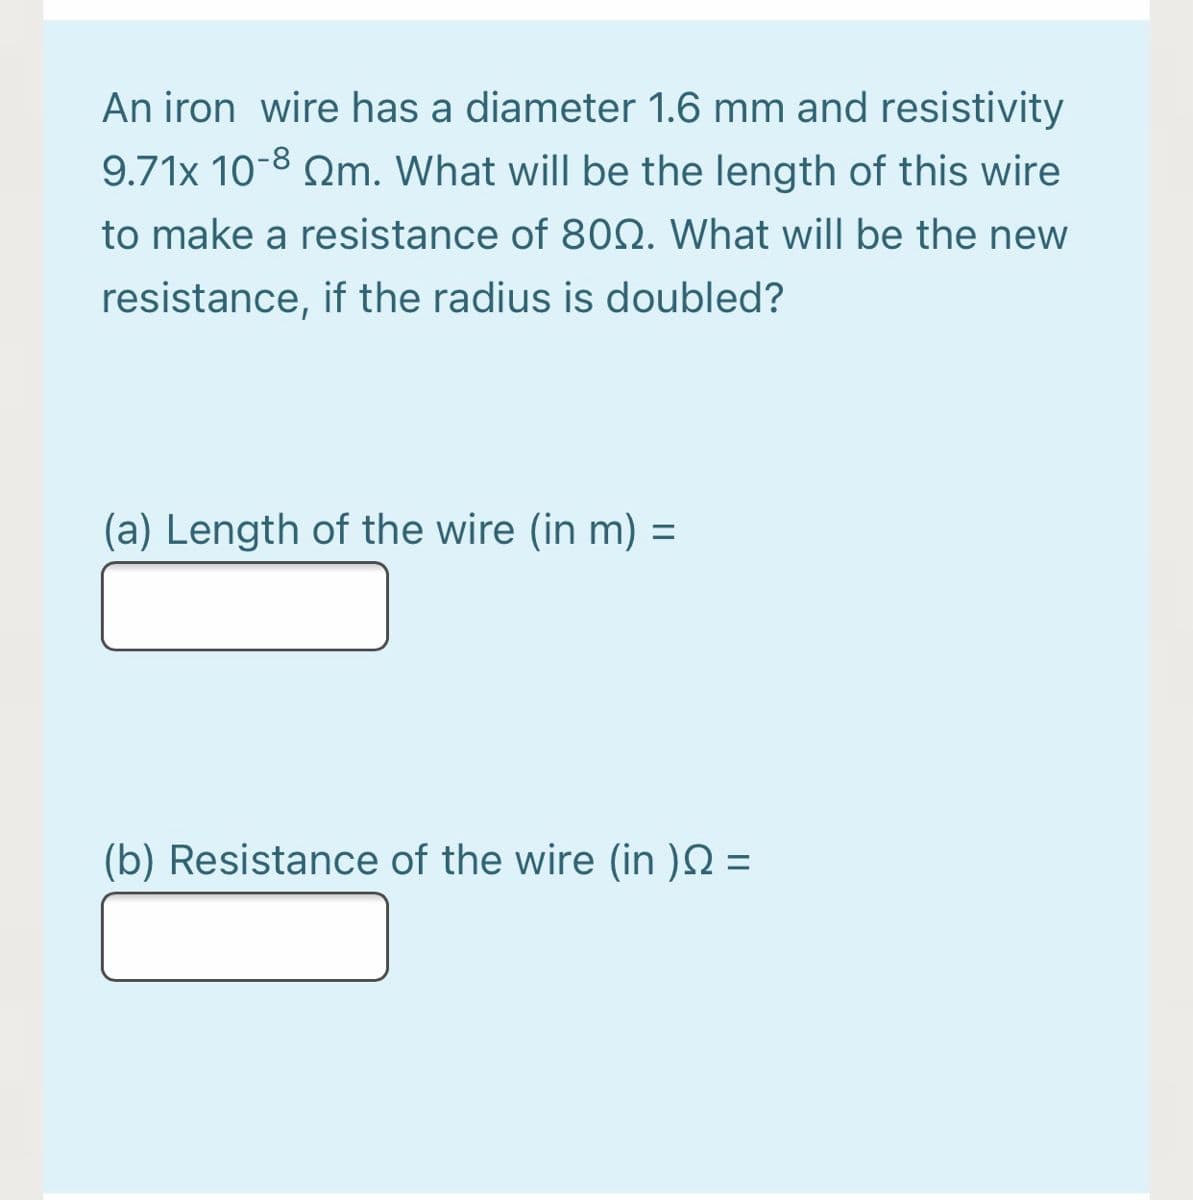 An iron wire has a diameter 1.6 mm and resistivity
9.71x 10-8 m. What will be the length of this wire
to make a resistance of 800. What will be the new
resistance, if the radius is doubled?
(a) Length of the wire (in m) =
=
(b) Resistance of the wire (in ) =